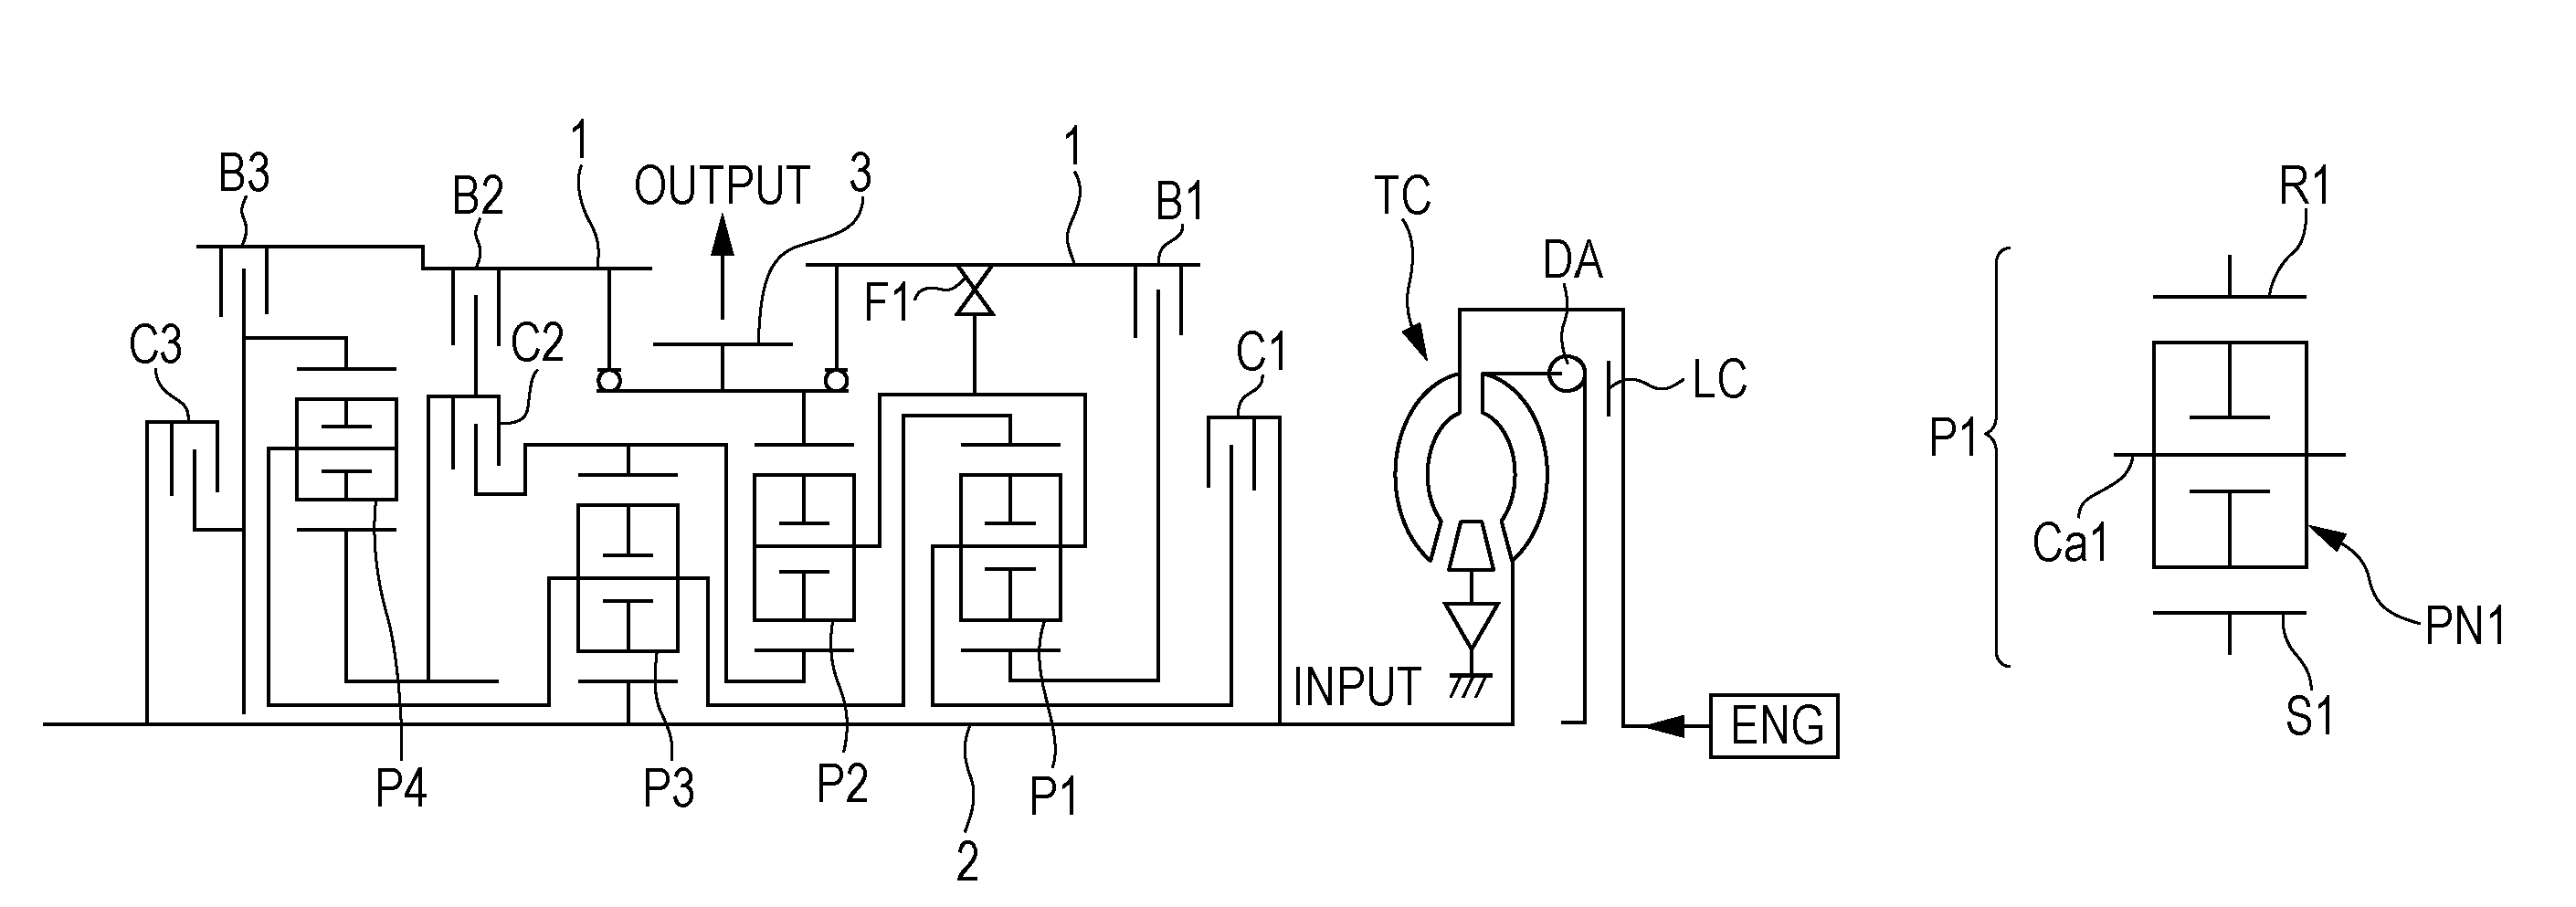 Automatic transmission controller